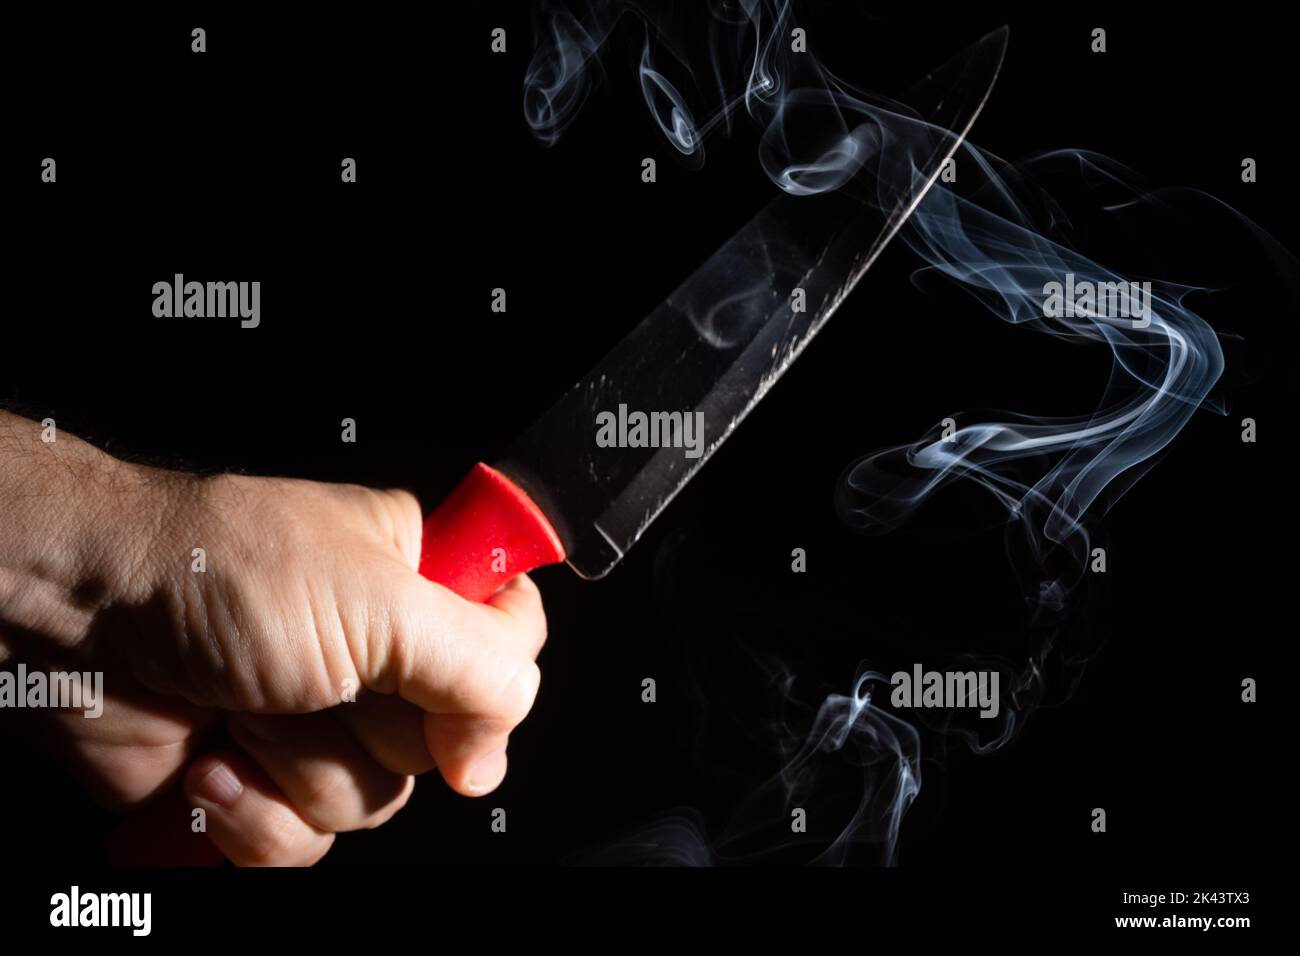 A sharp silver knife against a black background and smoke coming from below. Close up. Stock Photo